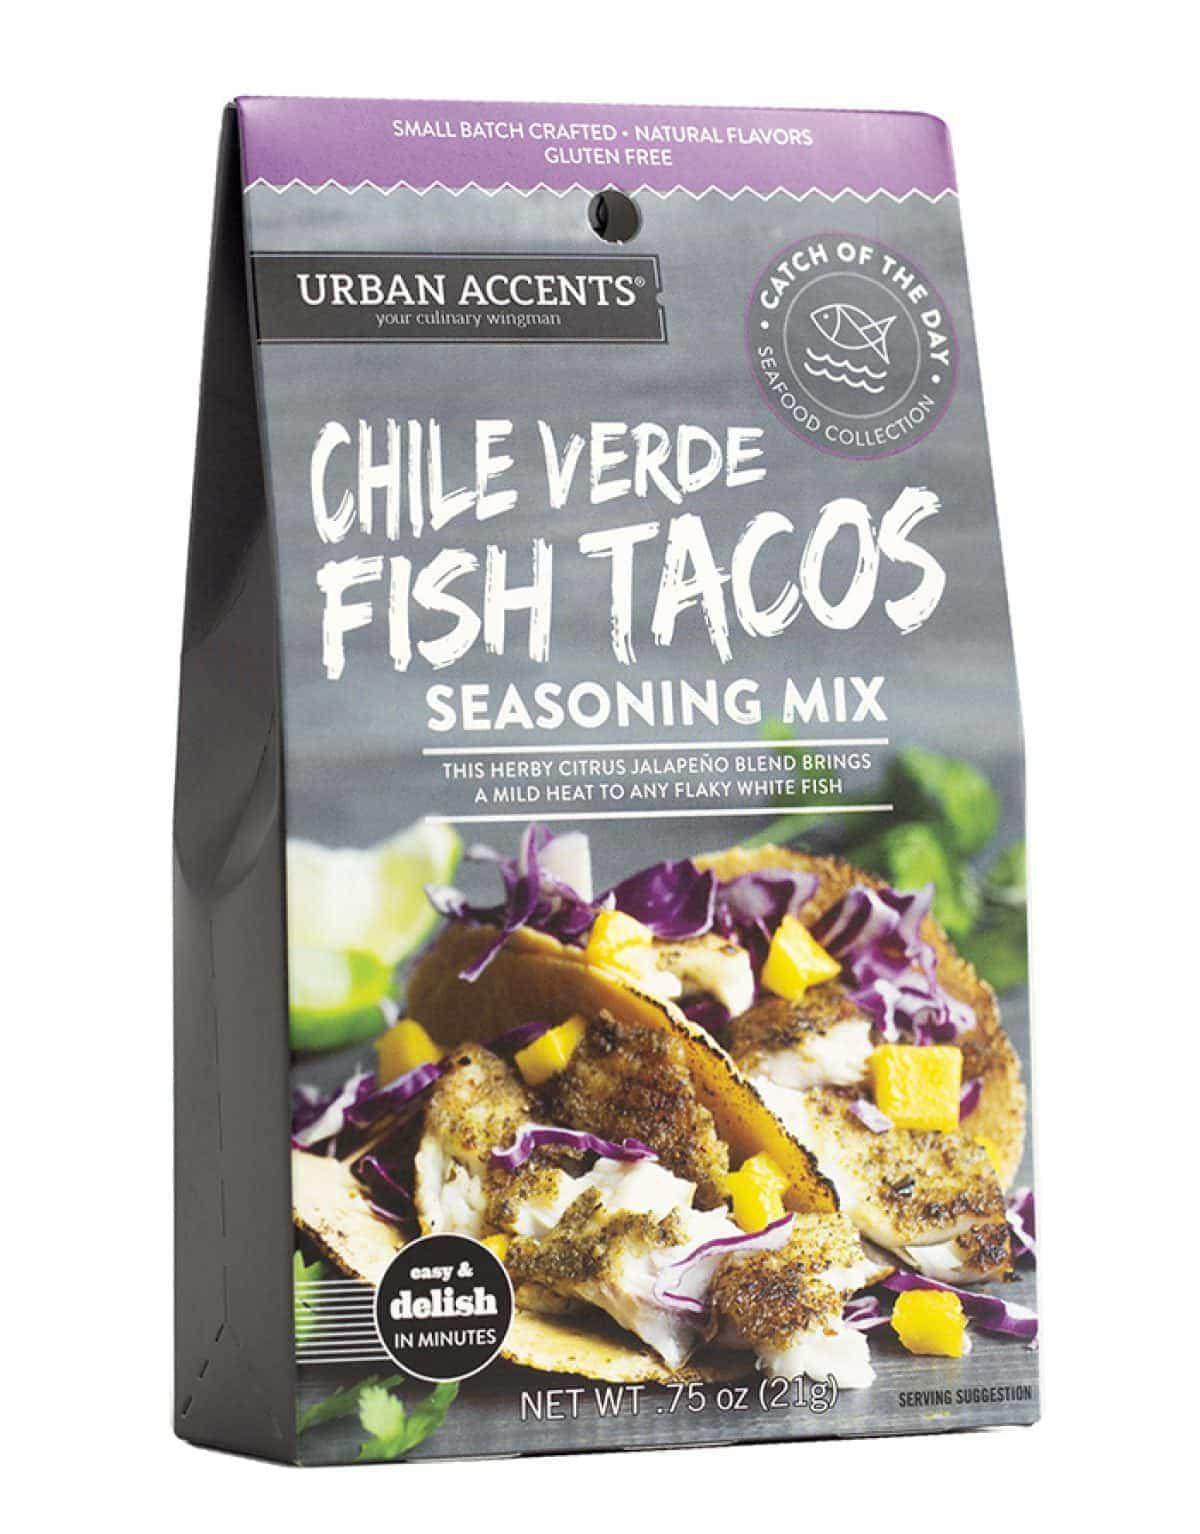 Urban Accents Seasoning Mix | Chile Verde Fish Tacos